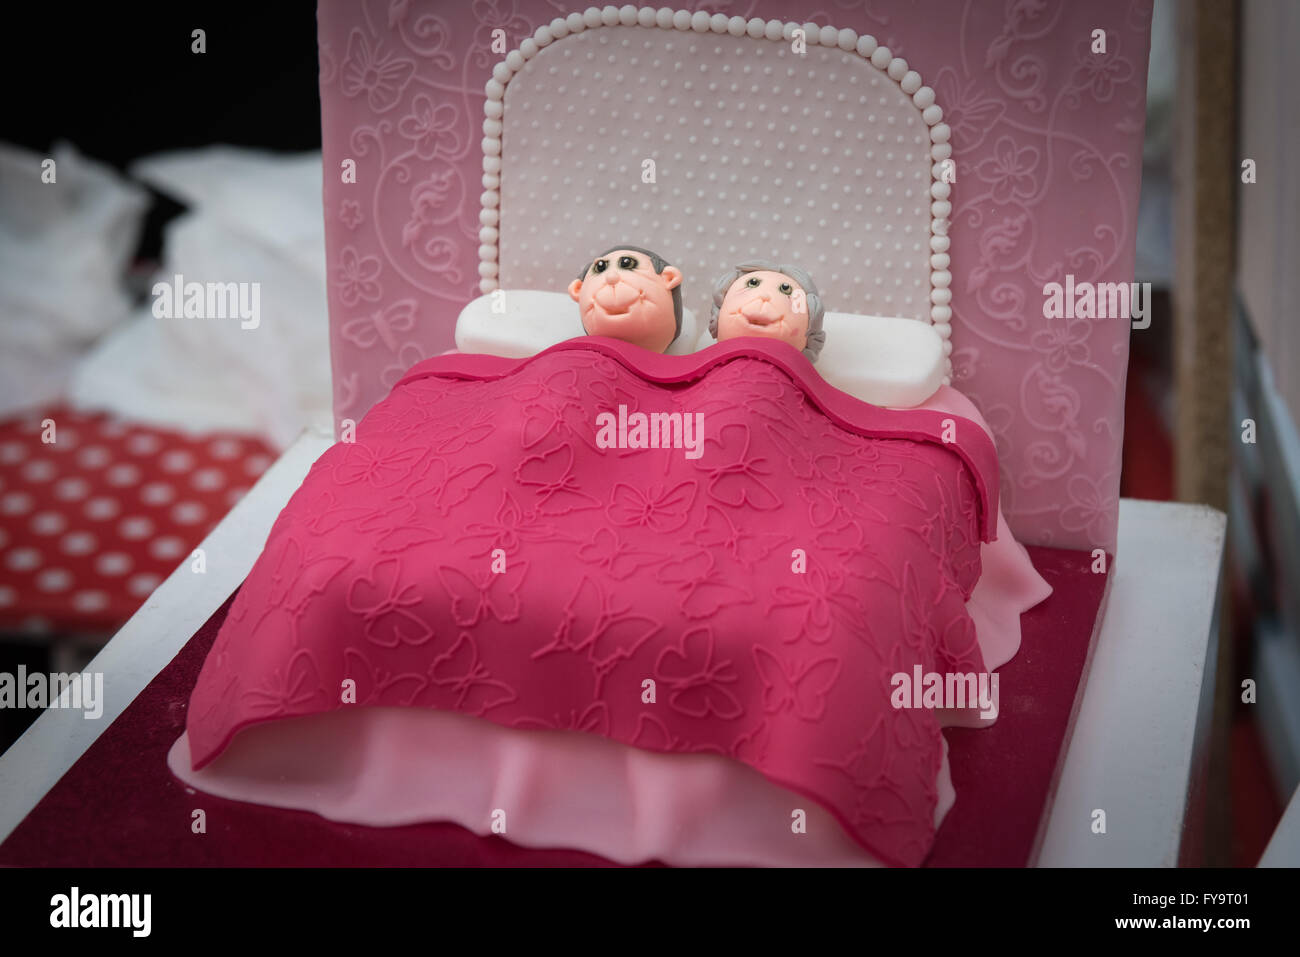 Old couple man woman in bed sleeping edible at Cake International – The Sugarcraft, Cake Decorating and Baking Show in London Stock Photo